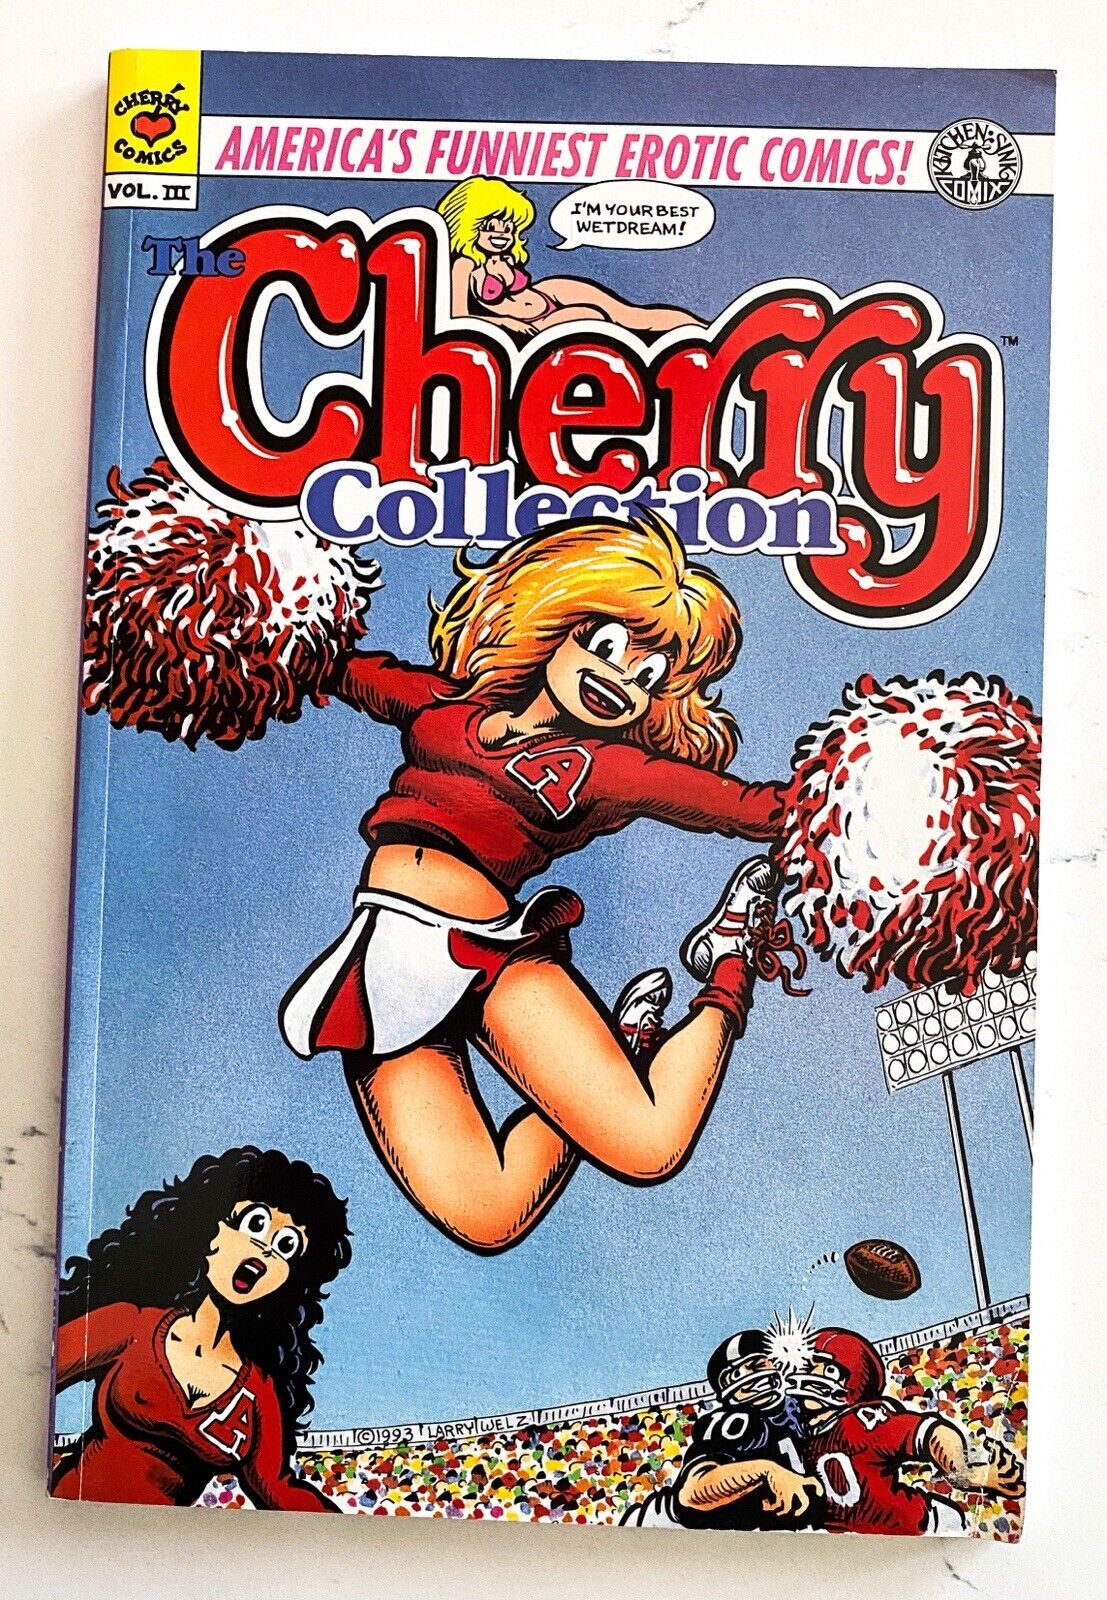 THE CHERRY COLLECTION VOL. III #3 1988 VINTAGE REALLY RARE COMIC TPB